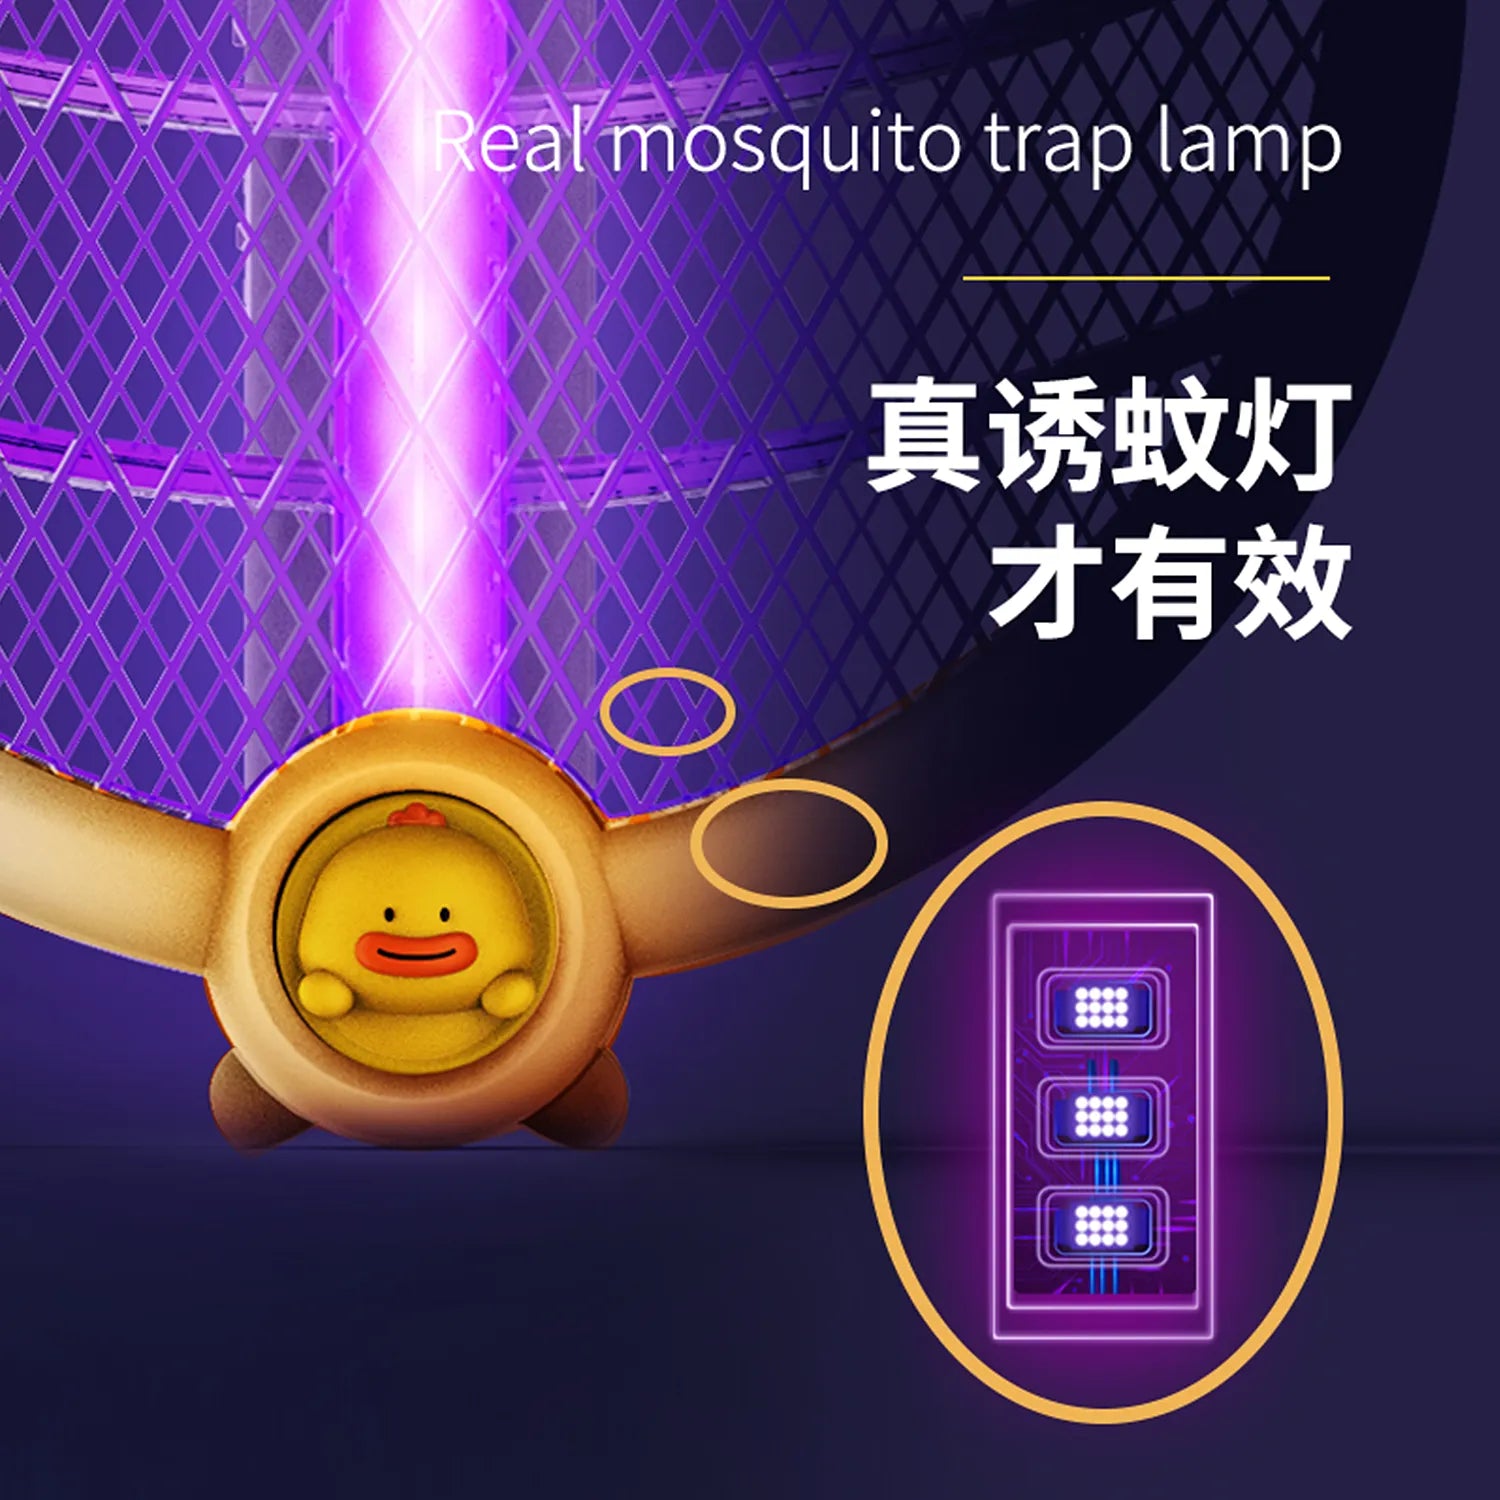 iCarer Family® Electric Foldable Anti-Mosquito Swatter Portable Hangable Automatic Mosquito Trap Killer Lamp Household